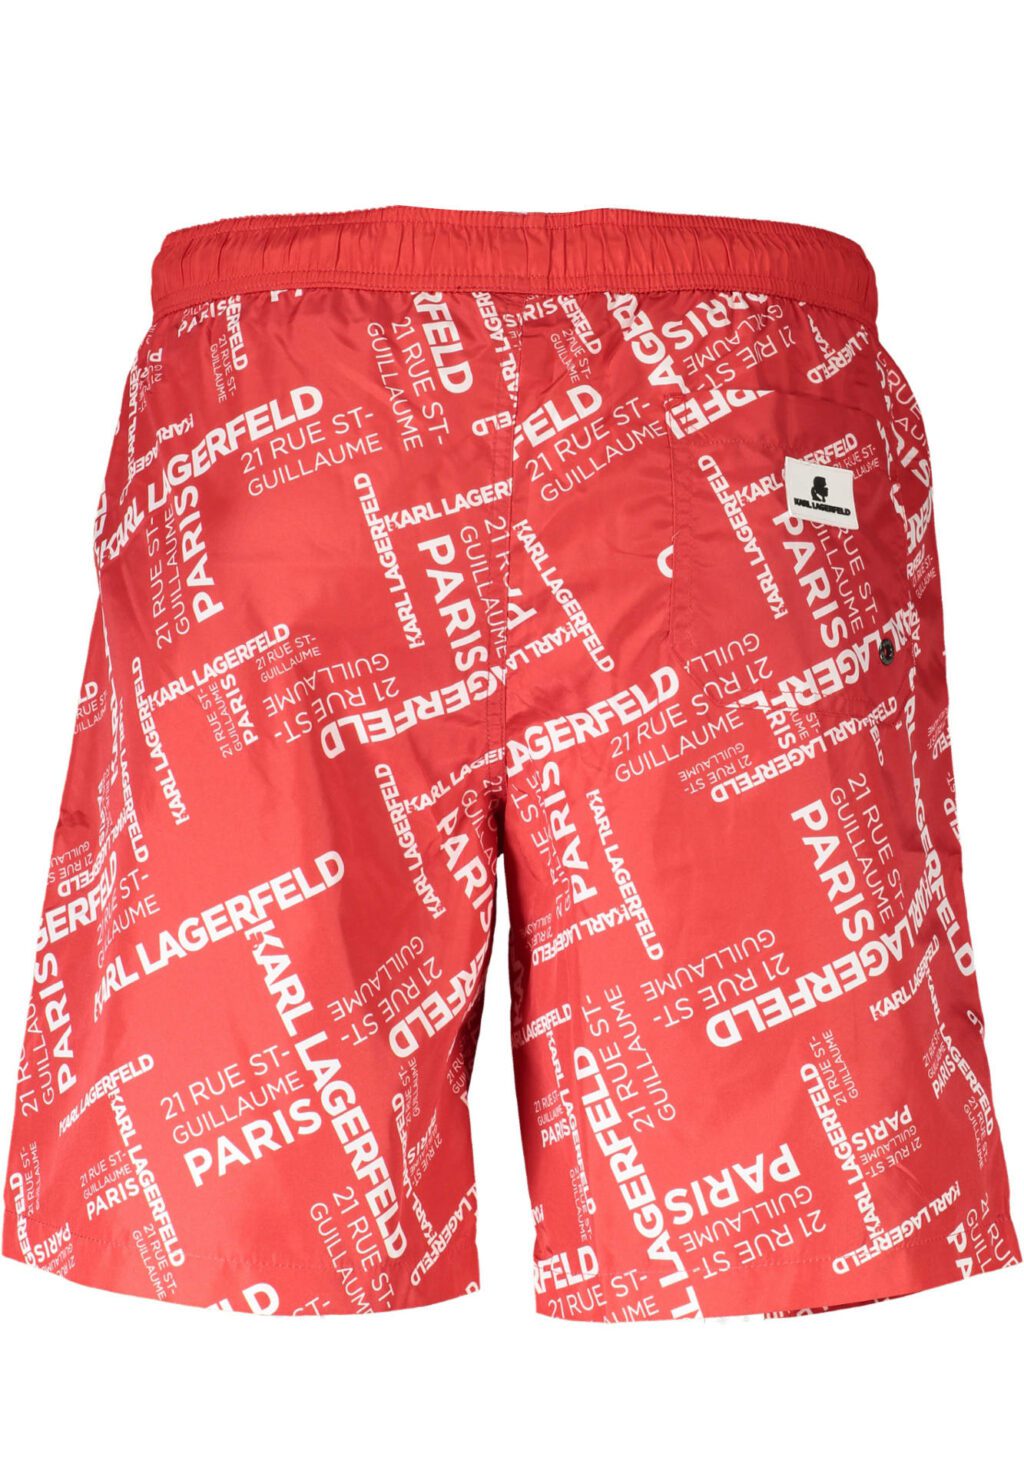 KARL LAGERFELD BEACHWEAR COSTUME PARTS UNDER MAN RED KL20MBL01_ROSSO_RED